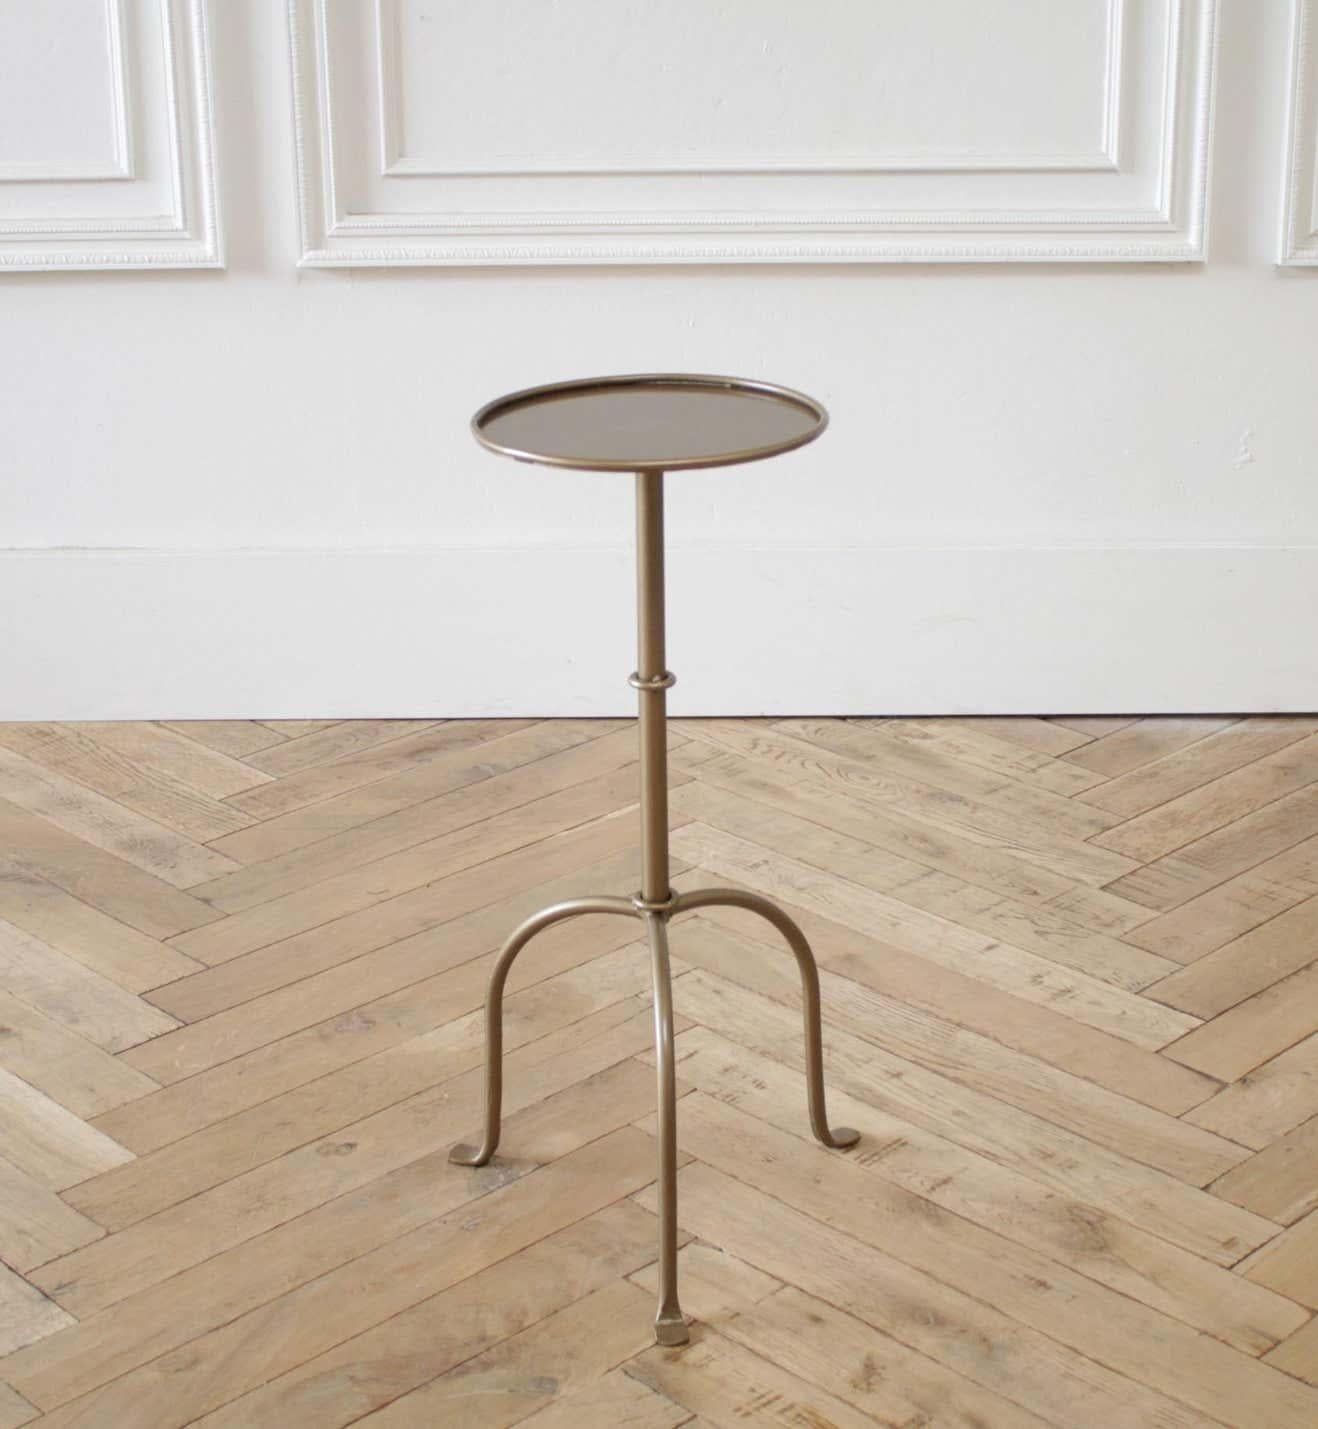 American Cannes Small Iron Drink Table in Brass Finish